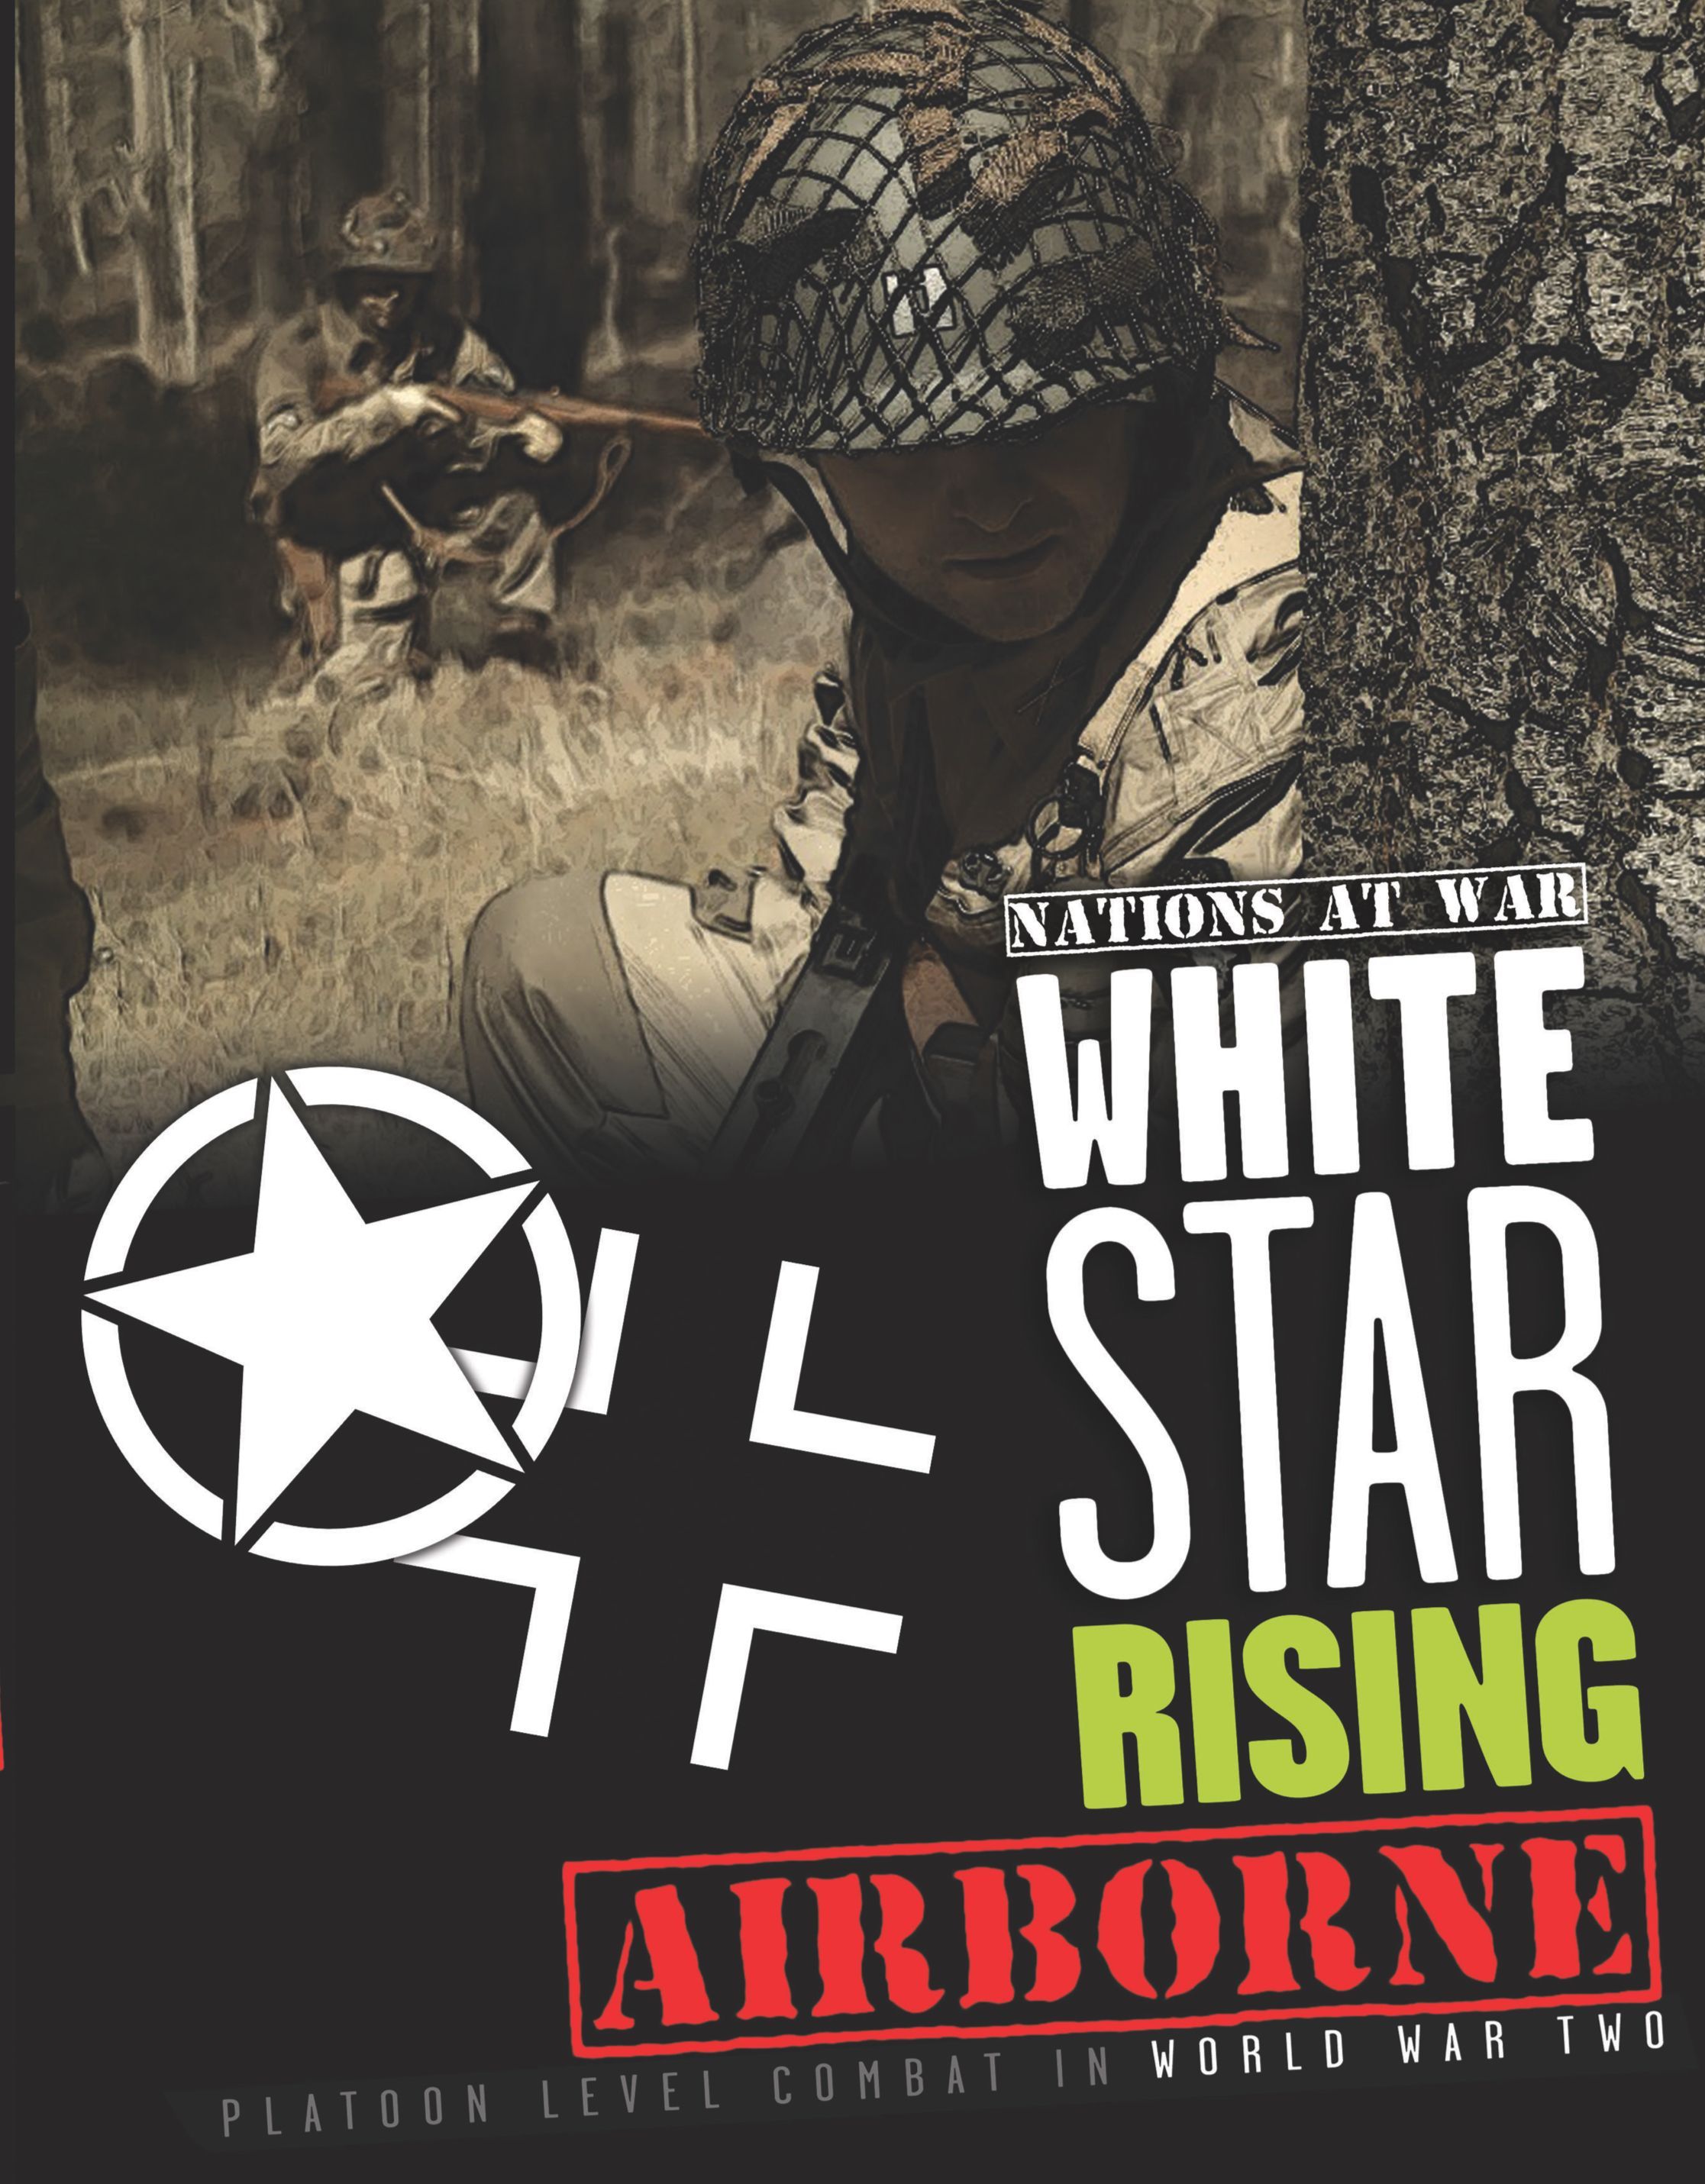 Nations at War: White Star Rising – Airborne